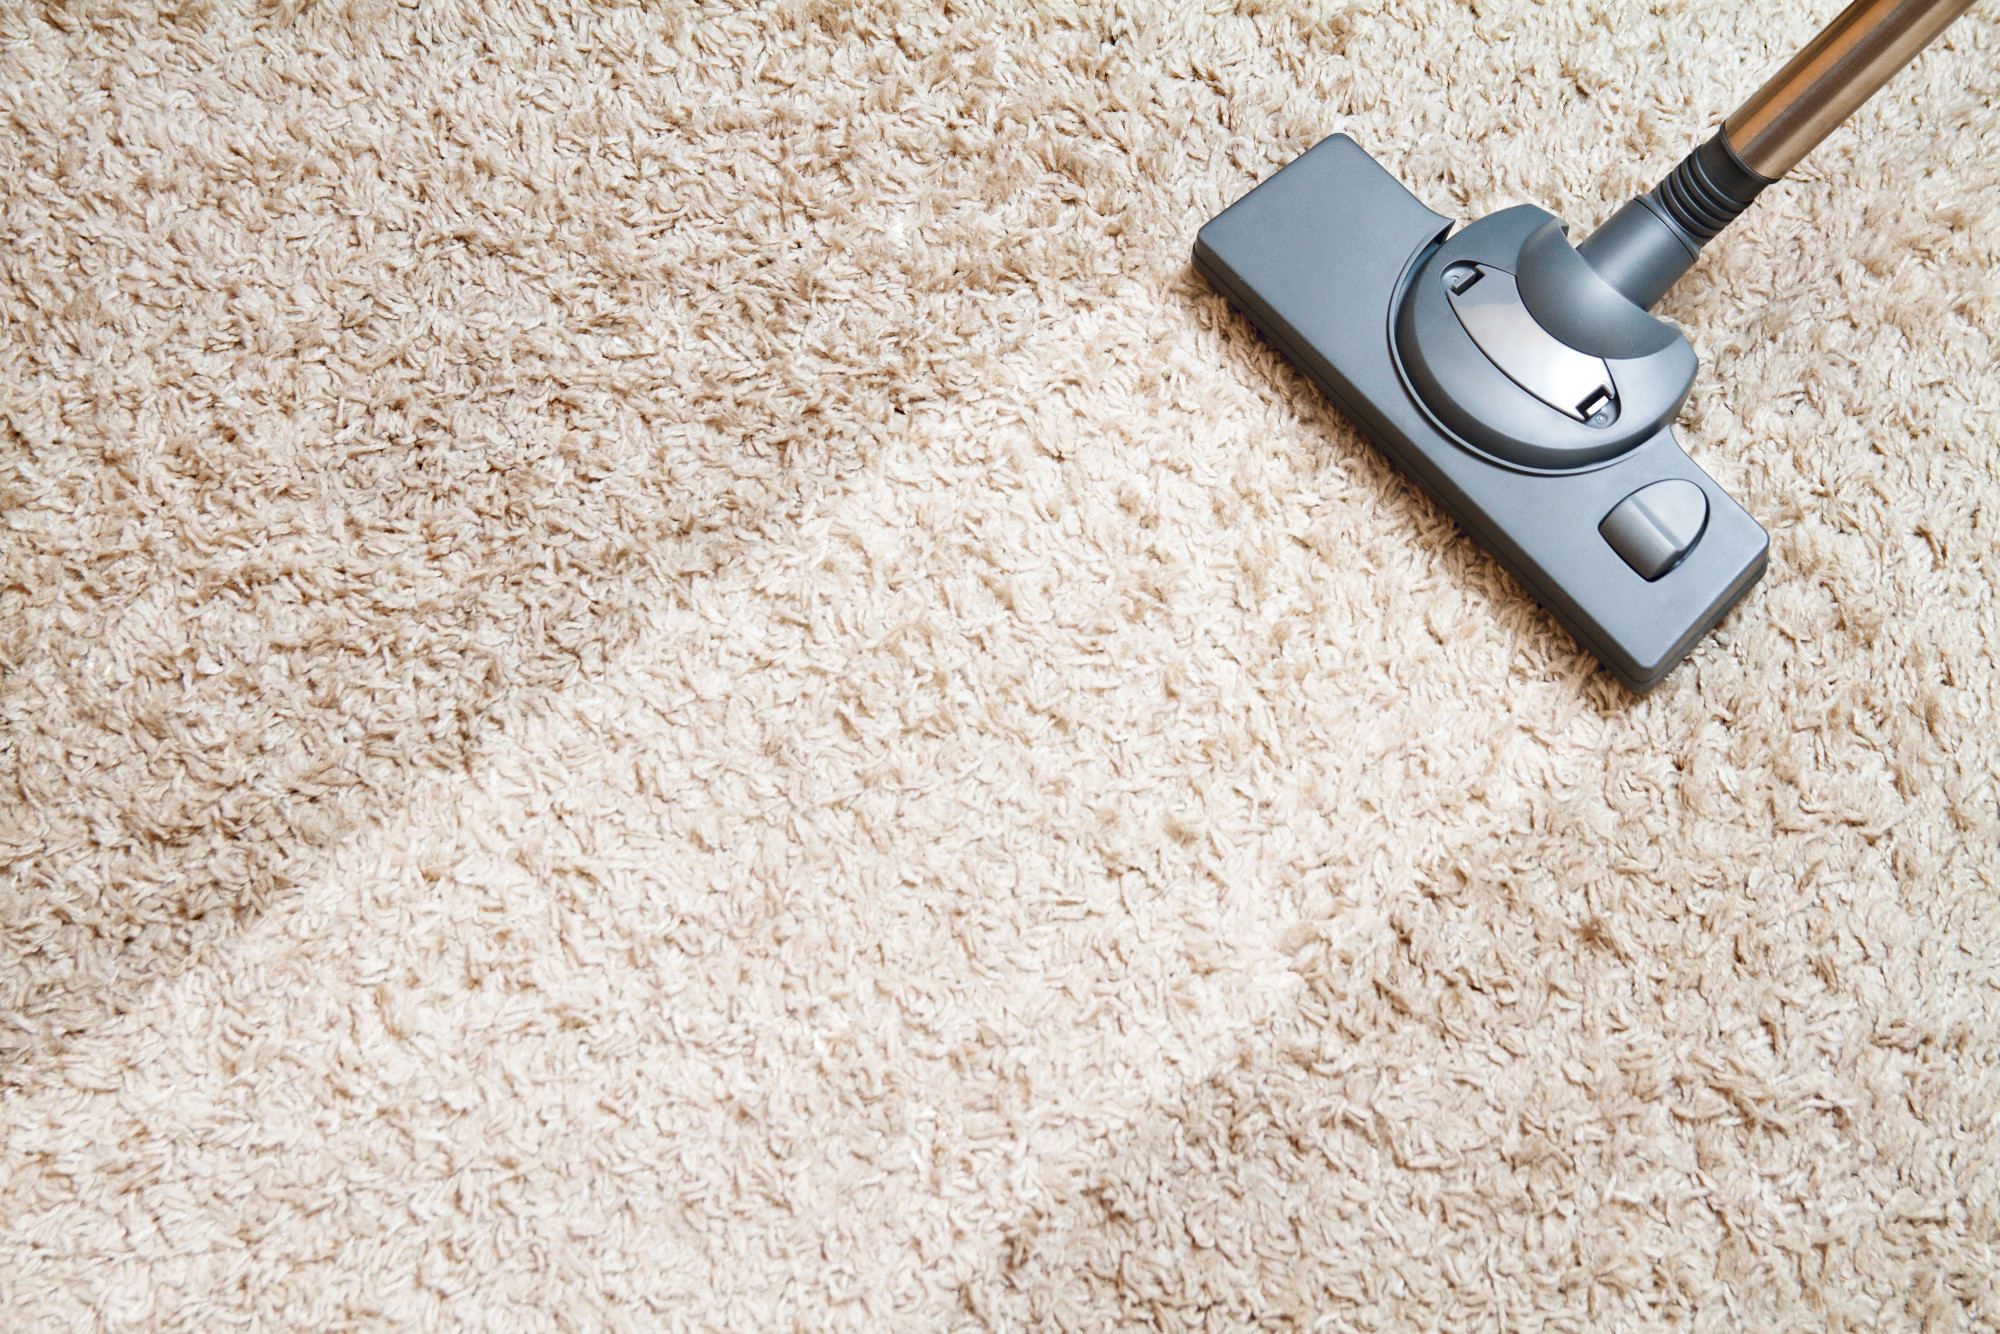 how to remove stains from carpet